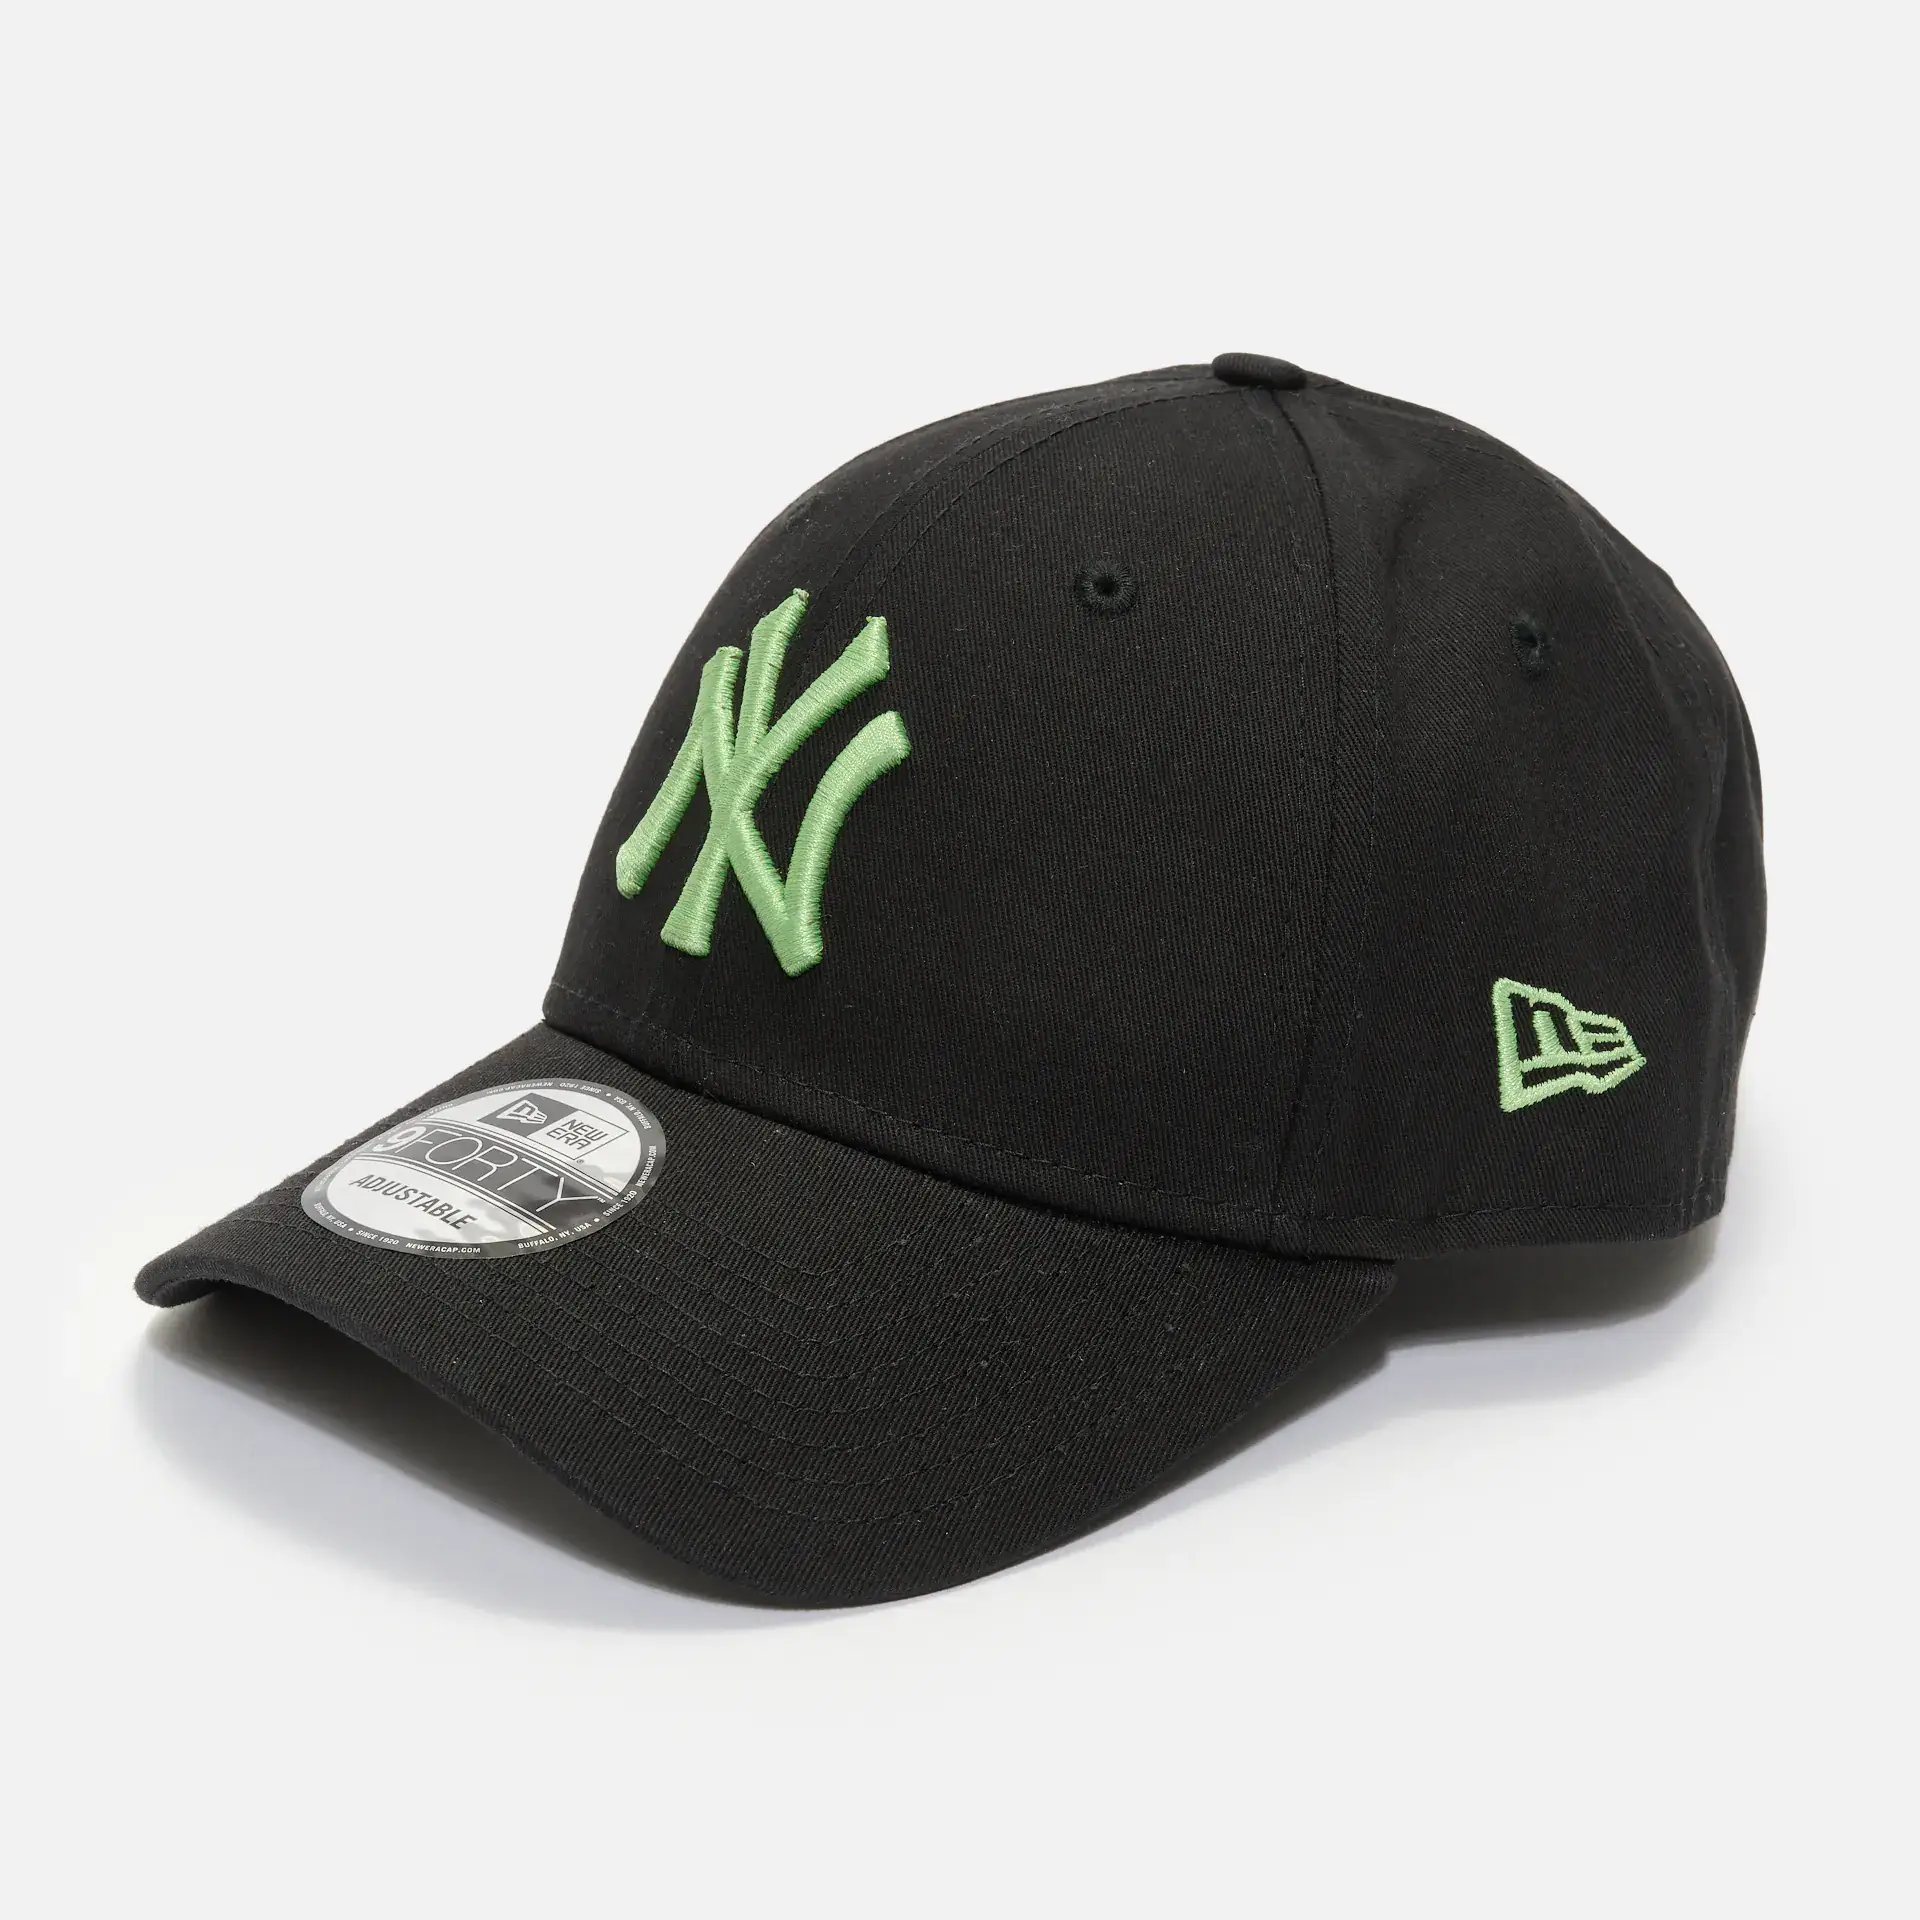 New Era MLB NY Yankees League Essential 9Forty Strapback Cap Black/Green Forrest